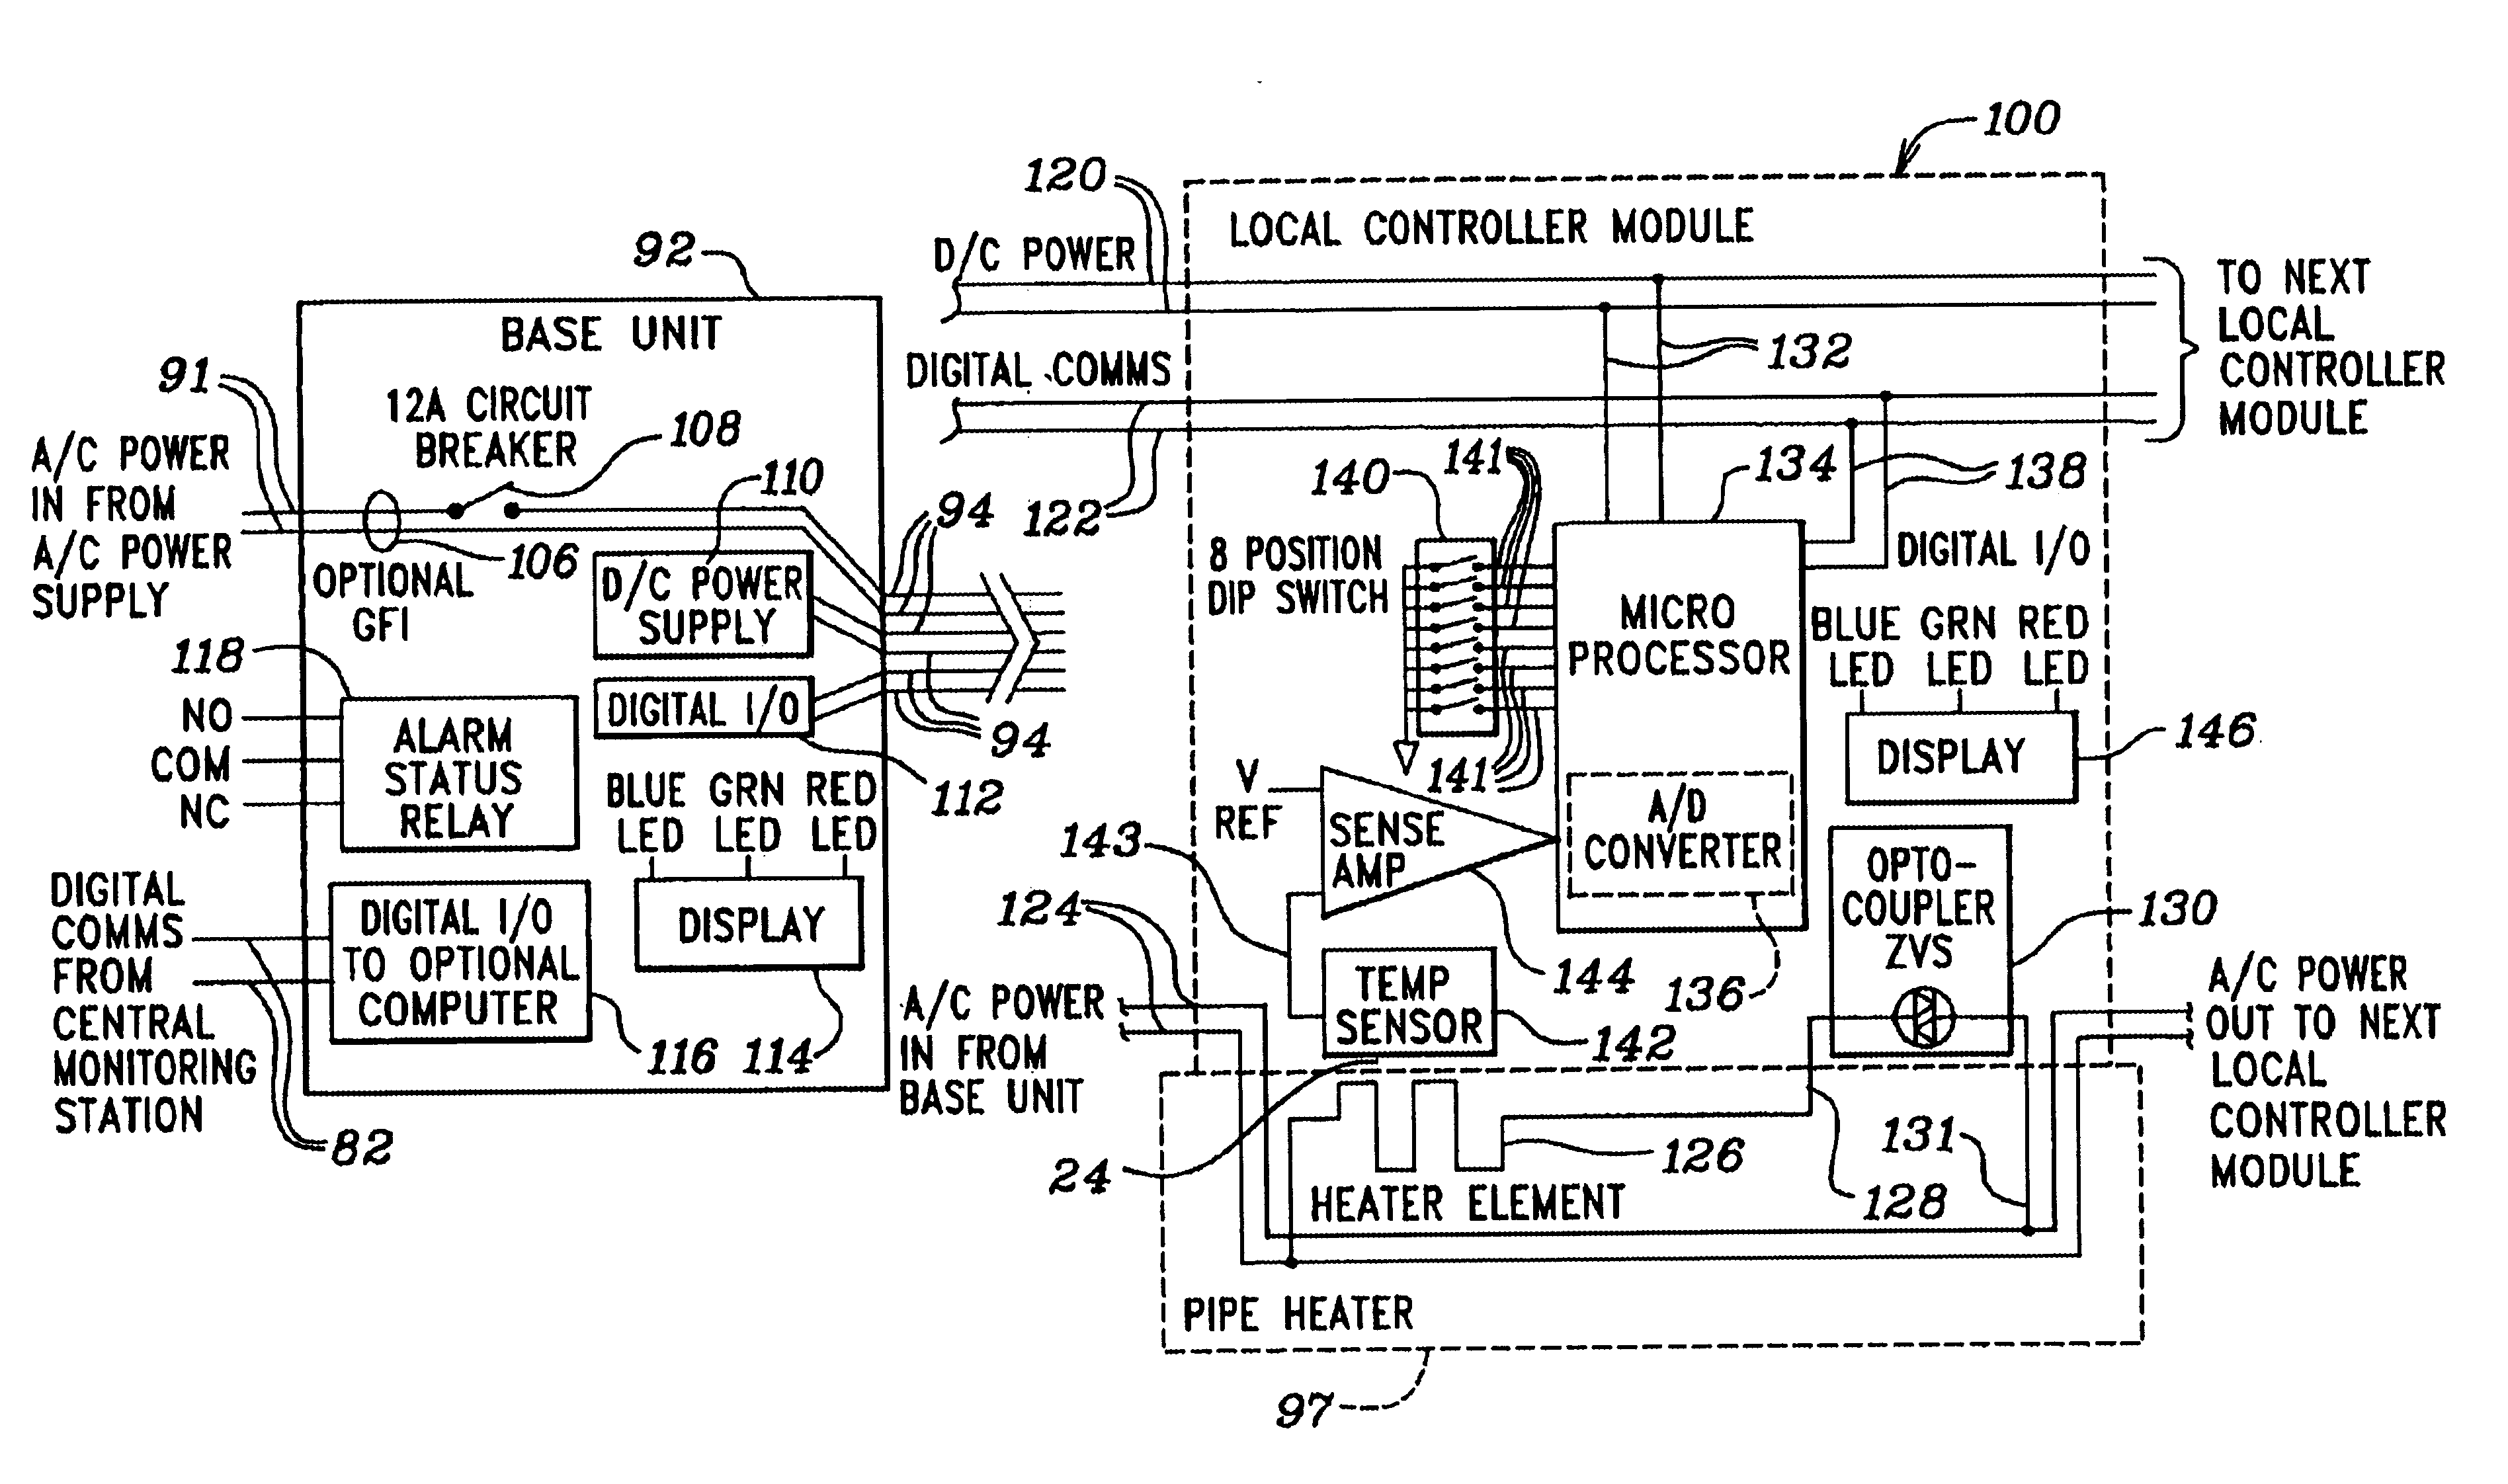 Heater control system with combination modular and daisy chained connectivity and optimum allocation of functions between base unit and local controller modules